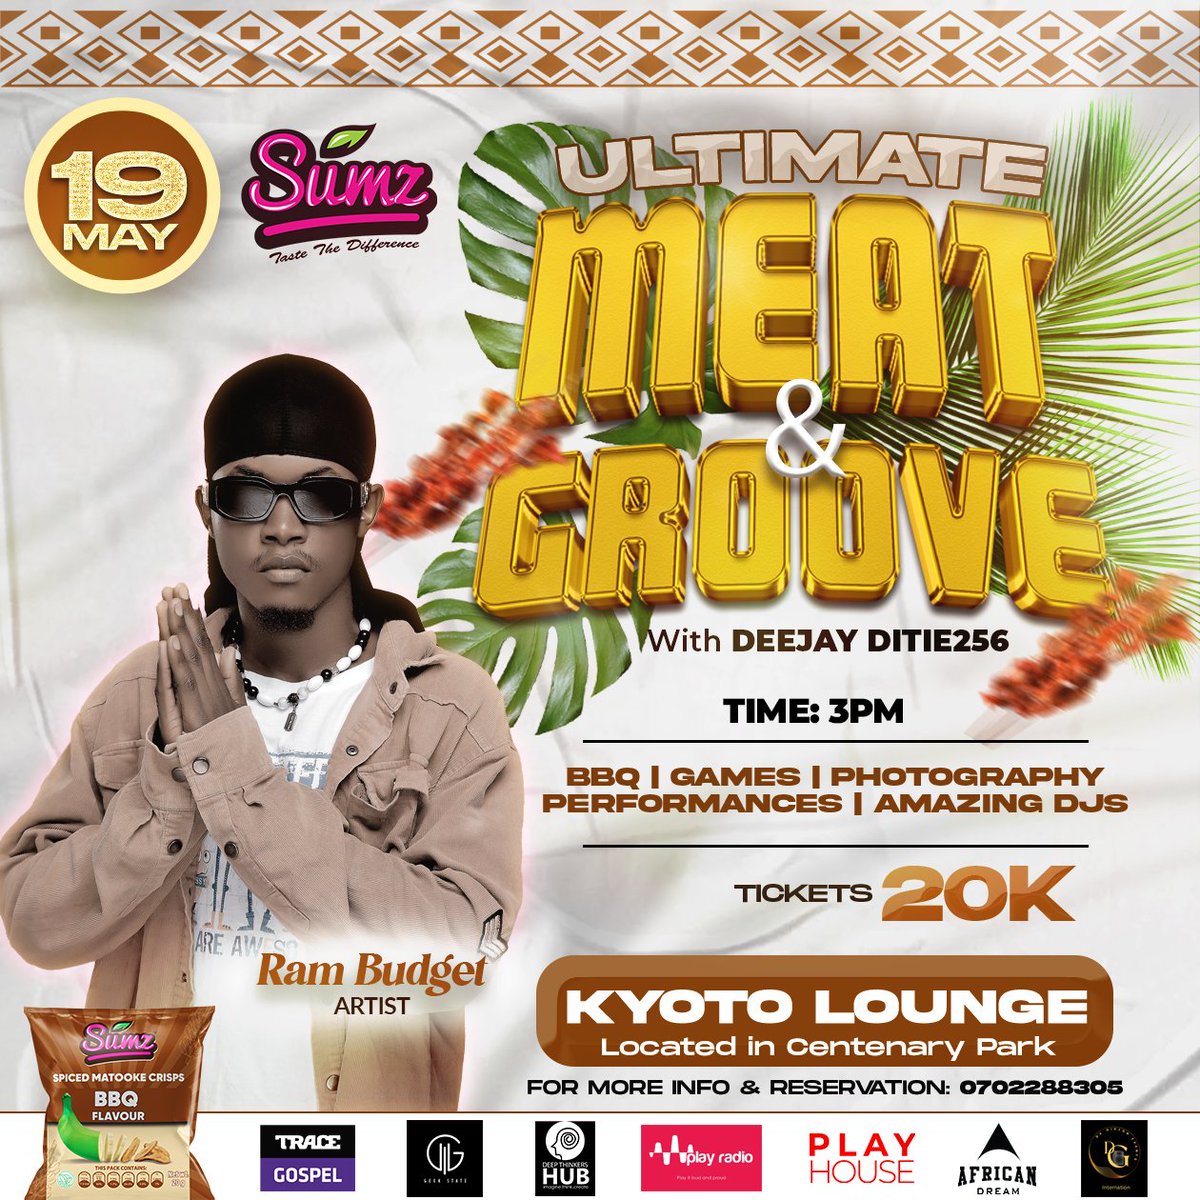 Allow Us To Present To The Dance Captain - RAM BUDGET Nanti Saawa Yakuzinaaaa We can't wait to see you all on the 19th/May/24 at Kyoto Lounge Centenary Park #MeatAndGroove!🥳 . Tickets ticketyo.com/ultimate-meat-… at 20K 🎫 And On @mtnmomoug Dial *165*3# Merchant Code 051058